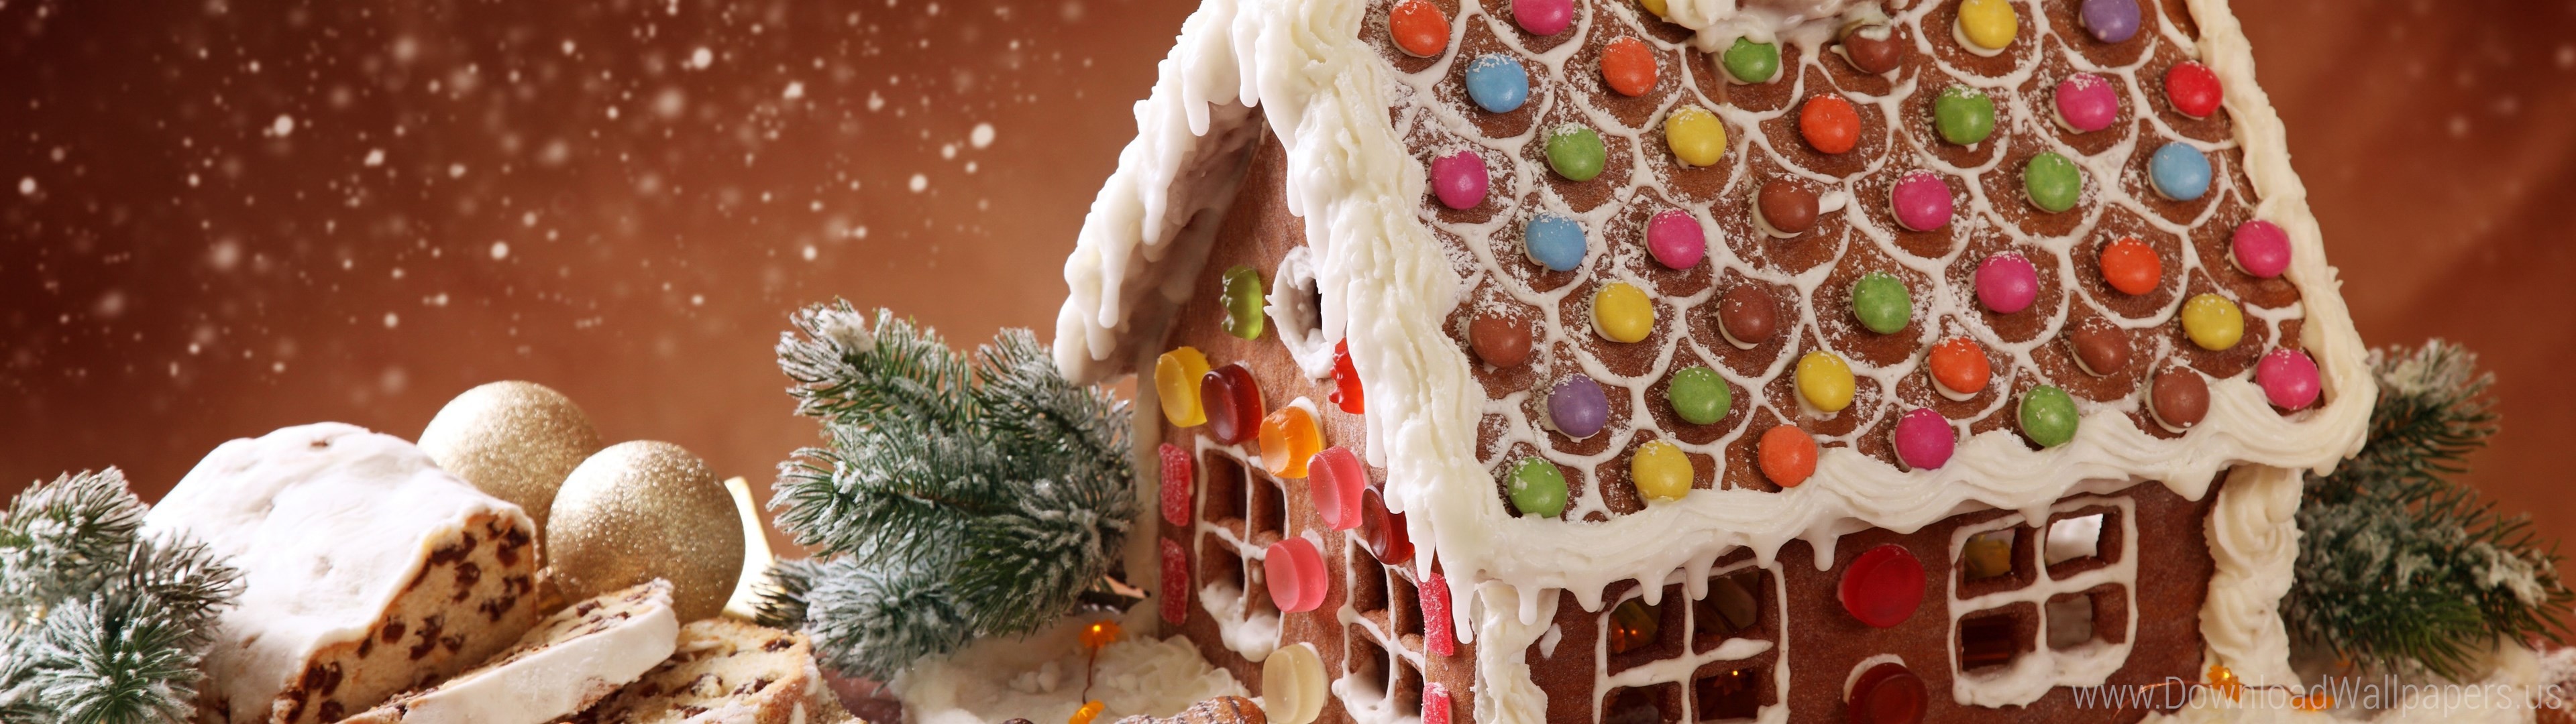 3840x1080 Download Dual Screen Wide  - Biscuit, Candyland, Christmas Bake,  Cookie, December Festive, Gingerbread, Winte House Wallpaper